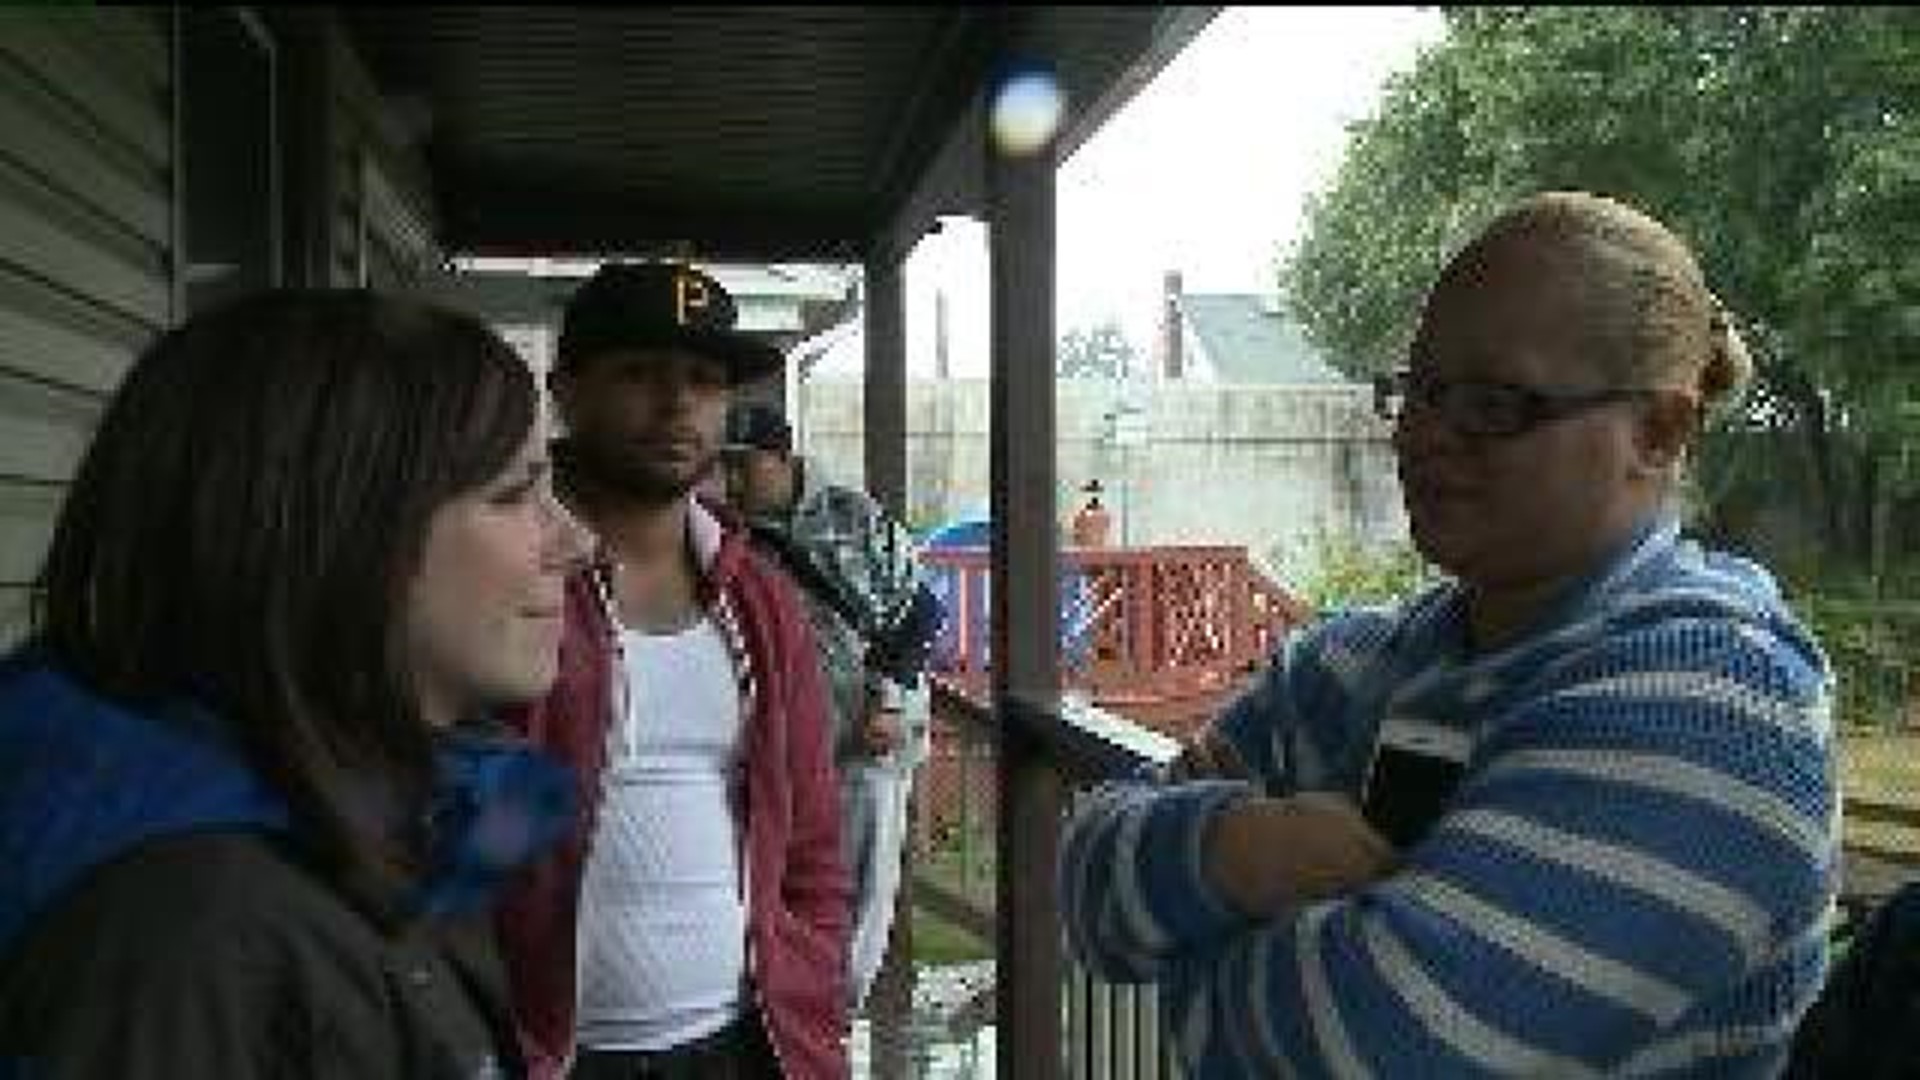 Family Speaks Out About Deadly Shooting in Hazleton